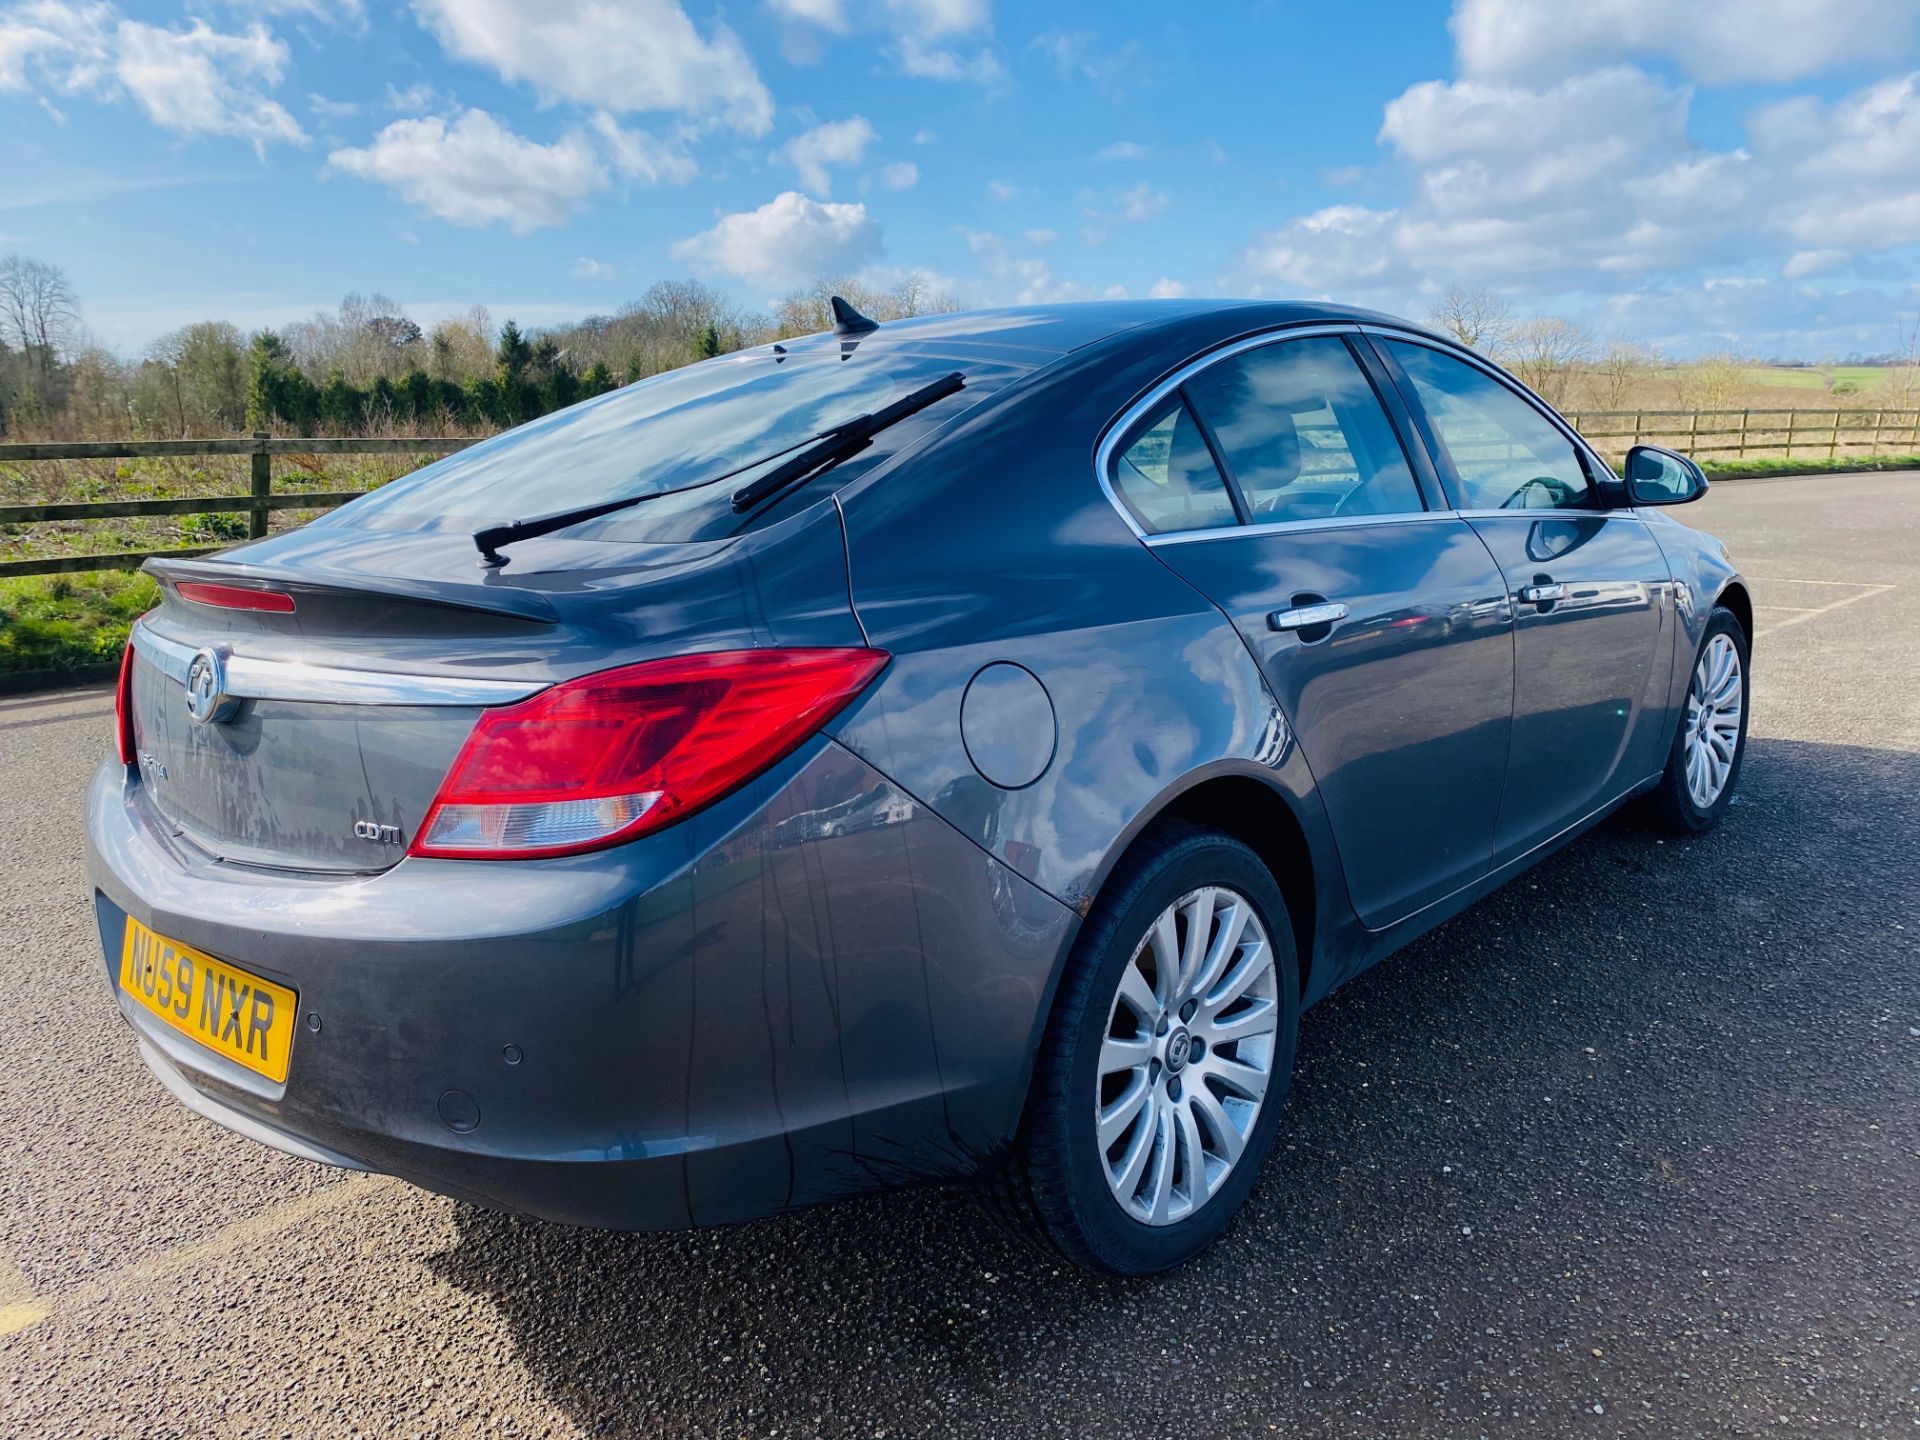 (ON SALE) VAUXHALL INSIGNIA 2.0CDTI "SE" 5 DOOR HATCHBACK - LEATHER - AIR CON - LOW MILES - NO VAT - Image 16 of 30